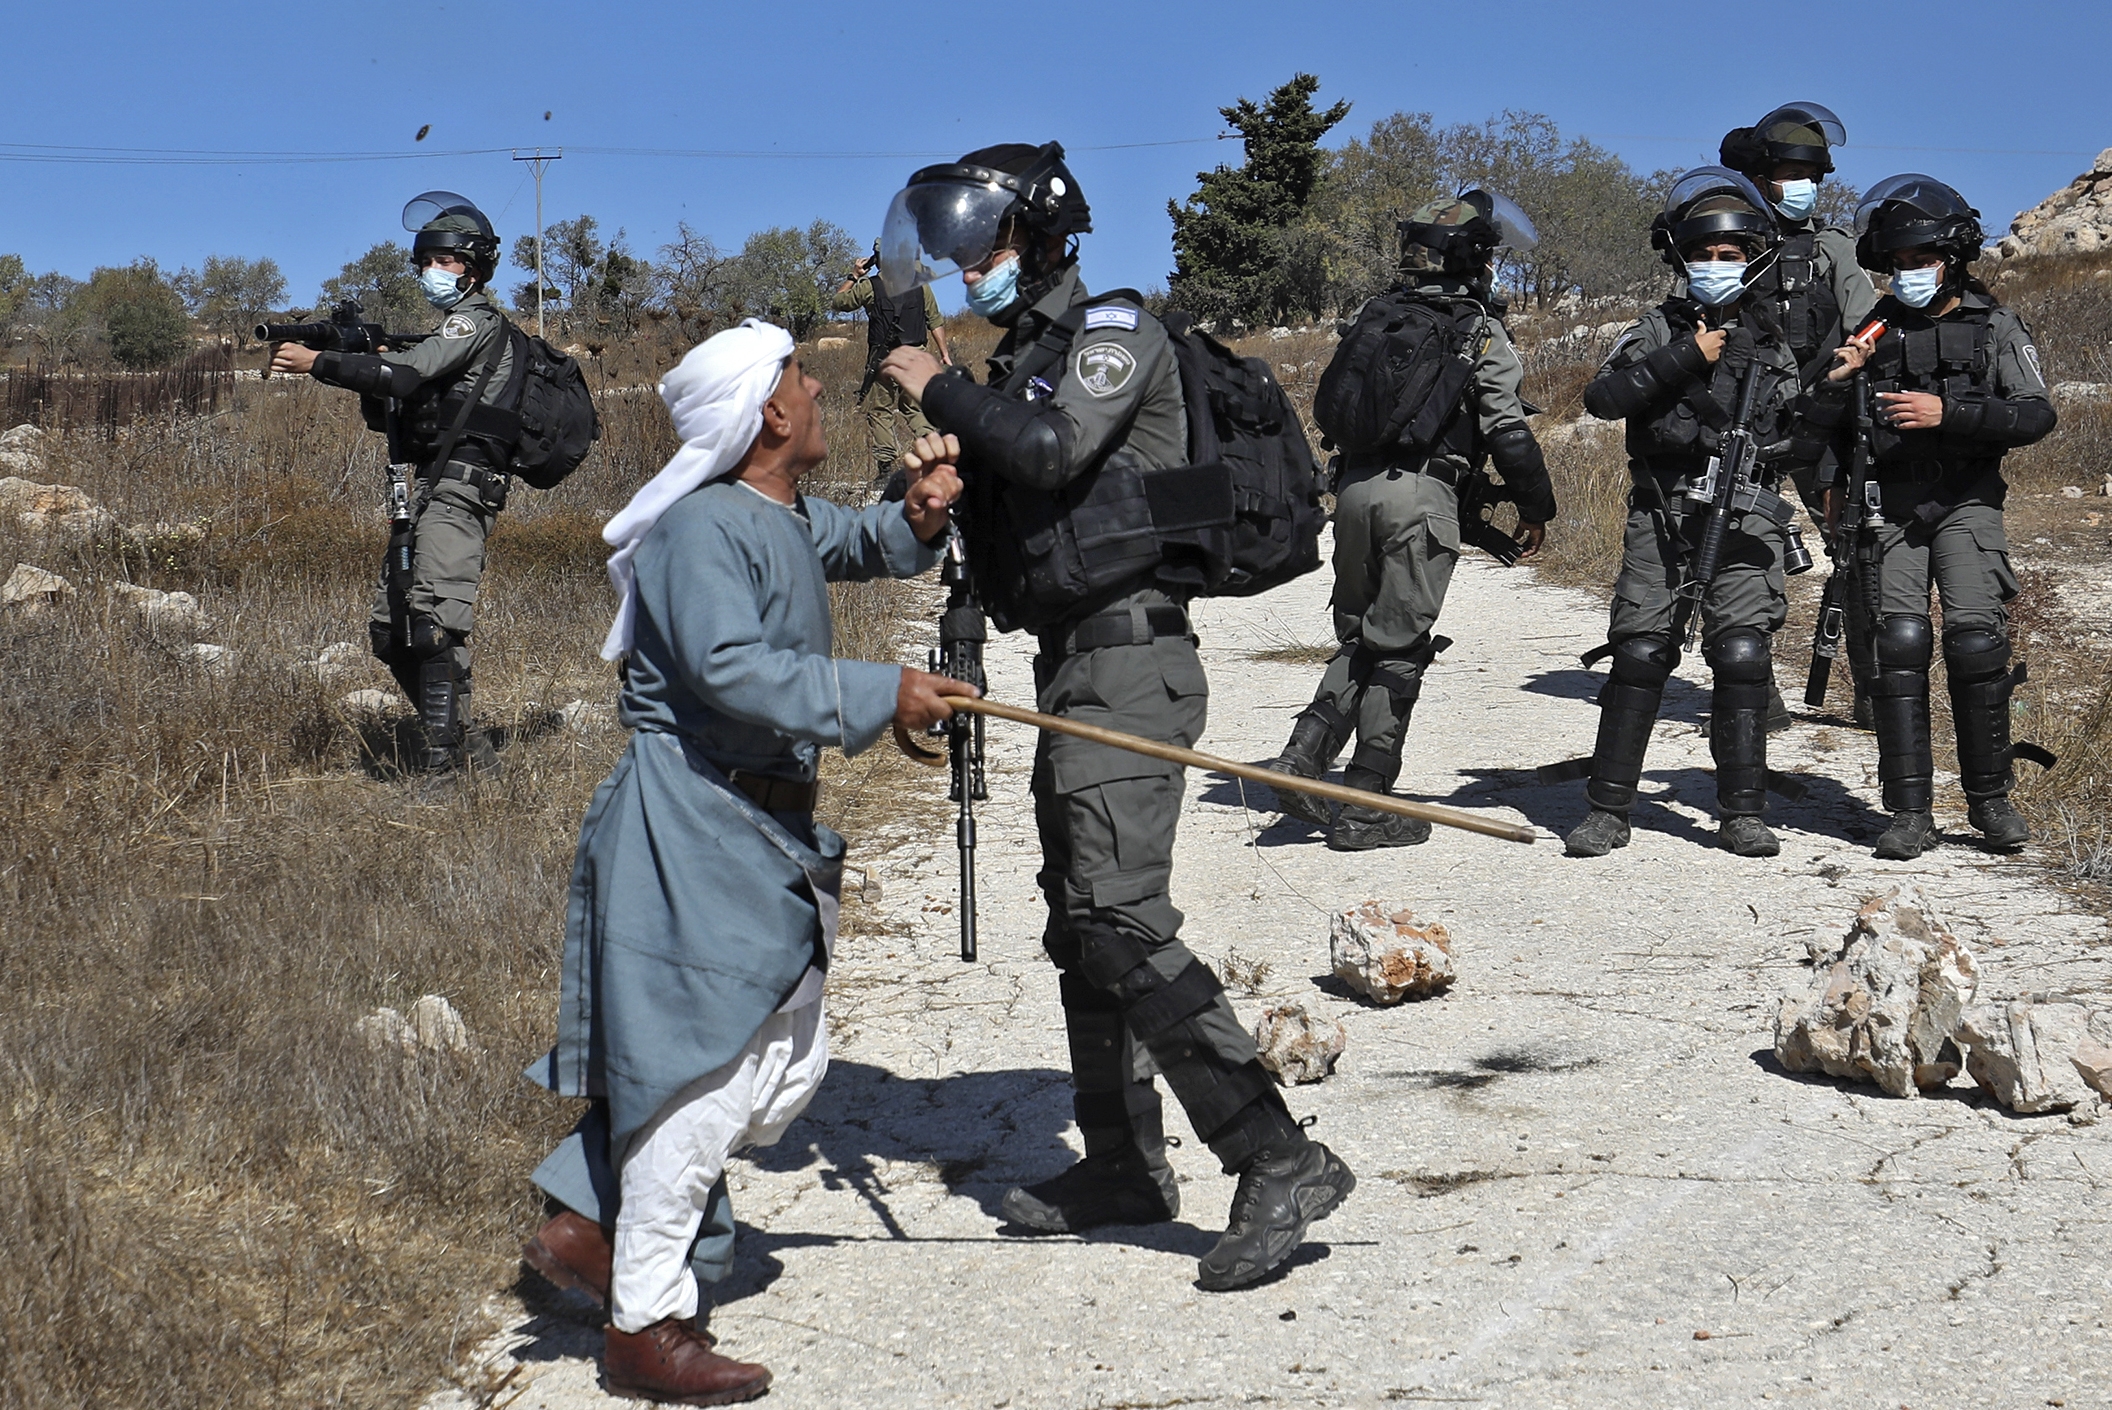 A Palestinian man confronts a member of the Israeli security forces 